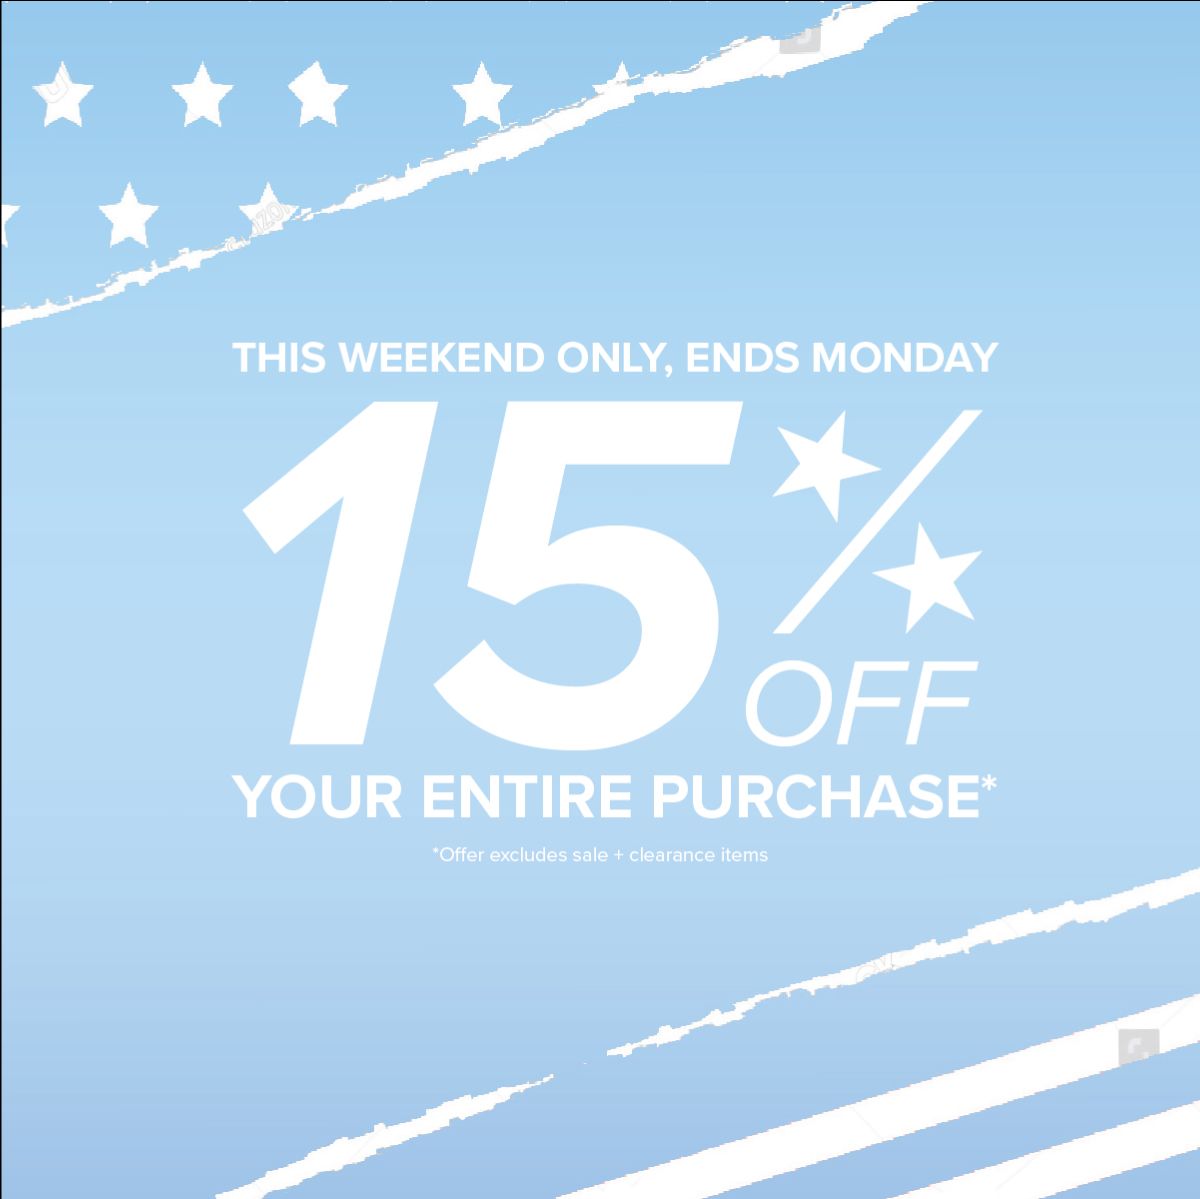 This Weekend Only Ends Monday 15% Off Your Entire Purchase